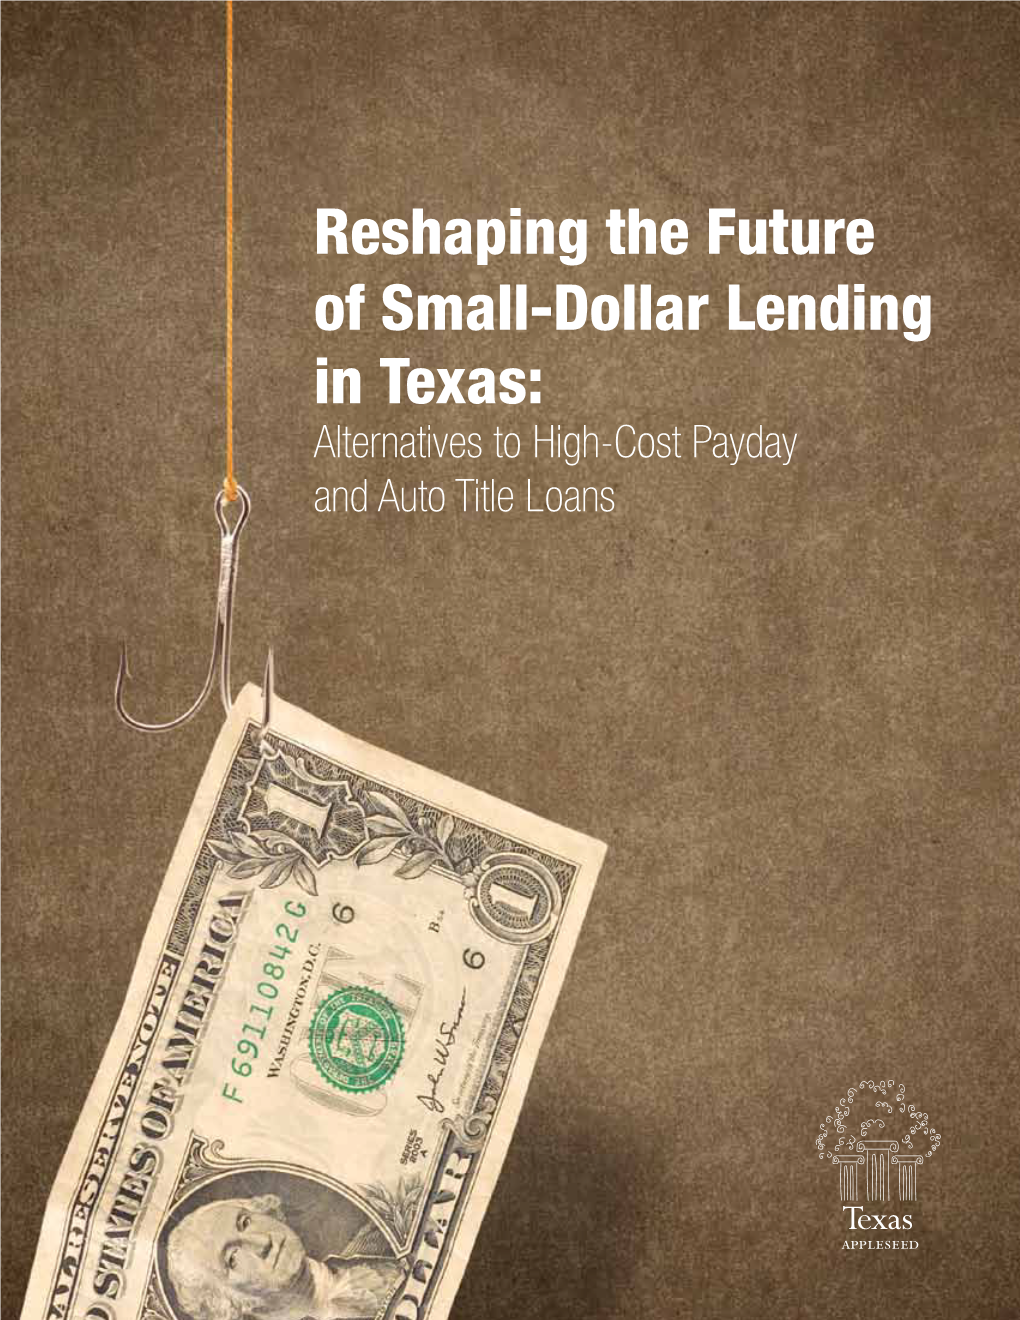 Reshaping the Future of Small-Dollar Lending in Texas: Alternatives to High-Cost Payday and Auto Title Loans